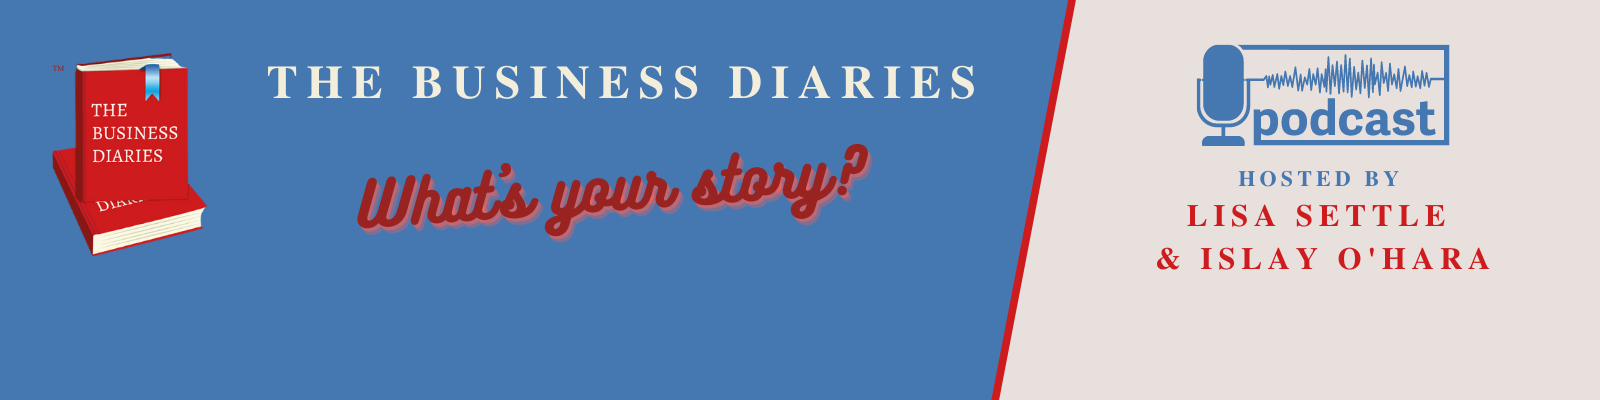 The Business Diaries Podcast